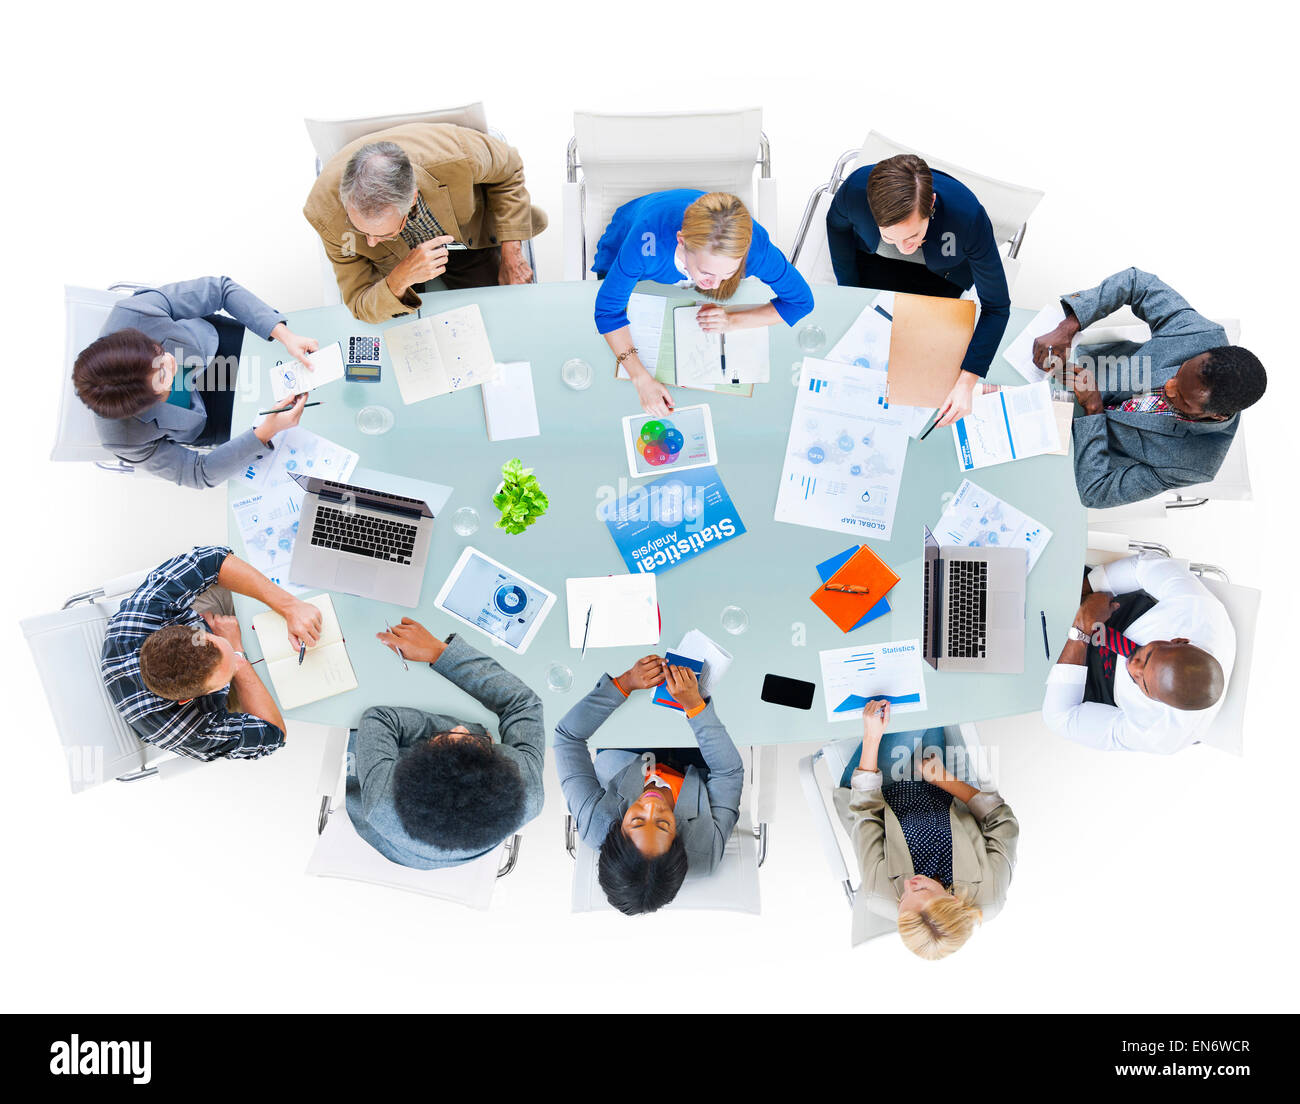 Group of Business People Discussing Business Isuses Stock Photo